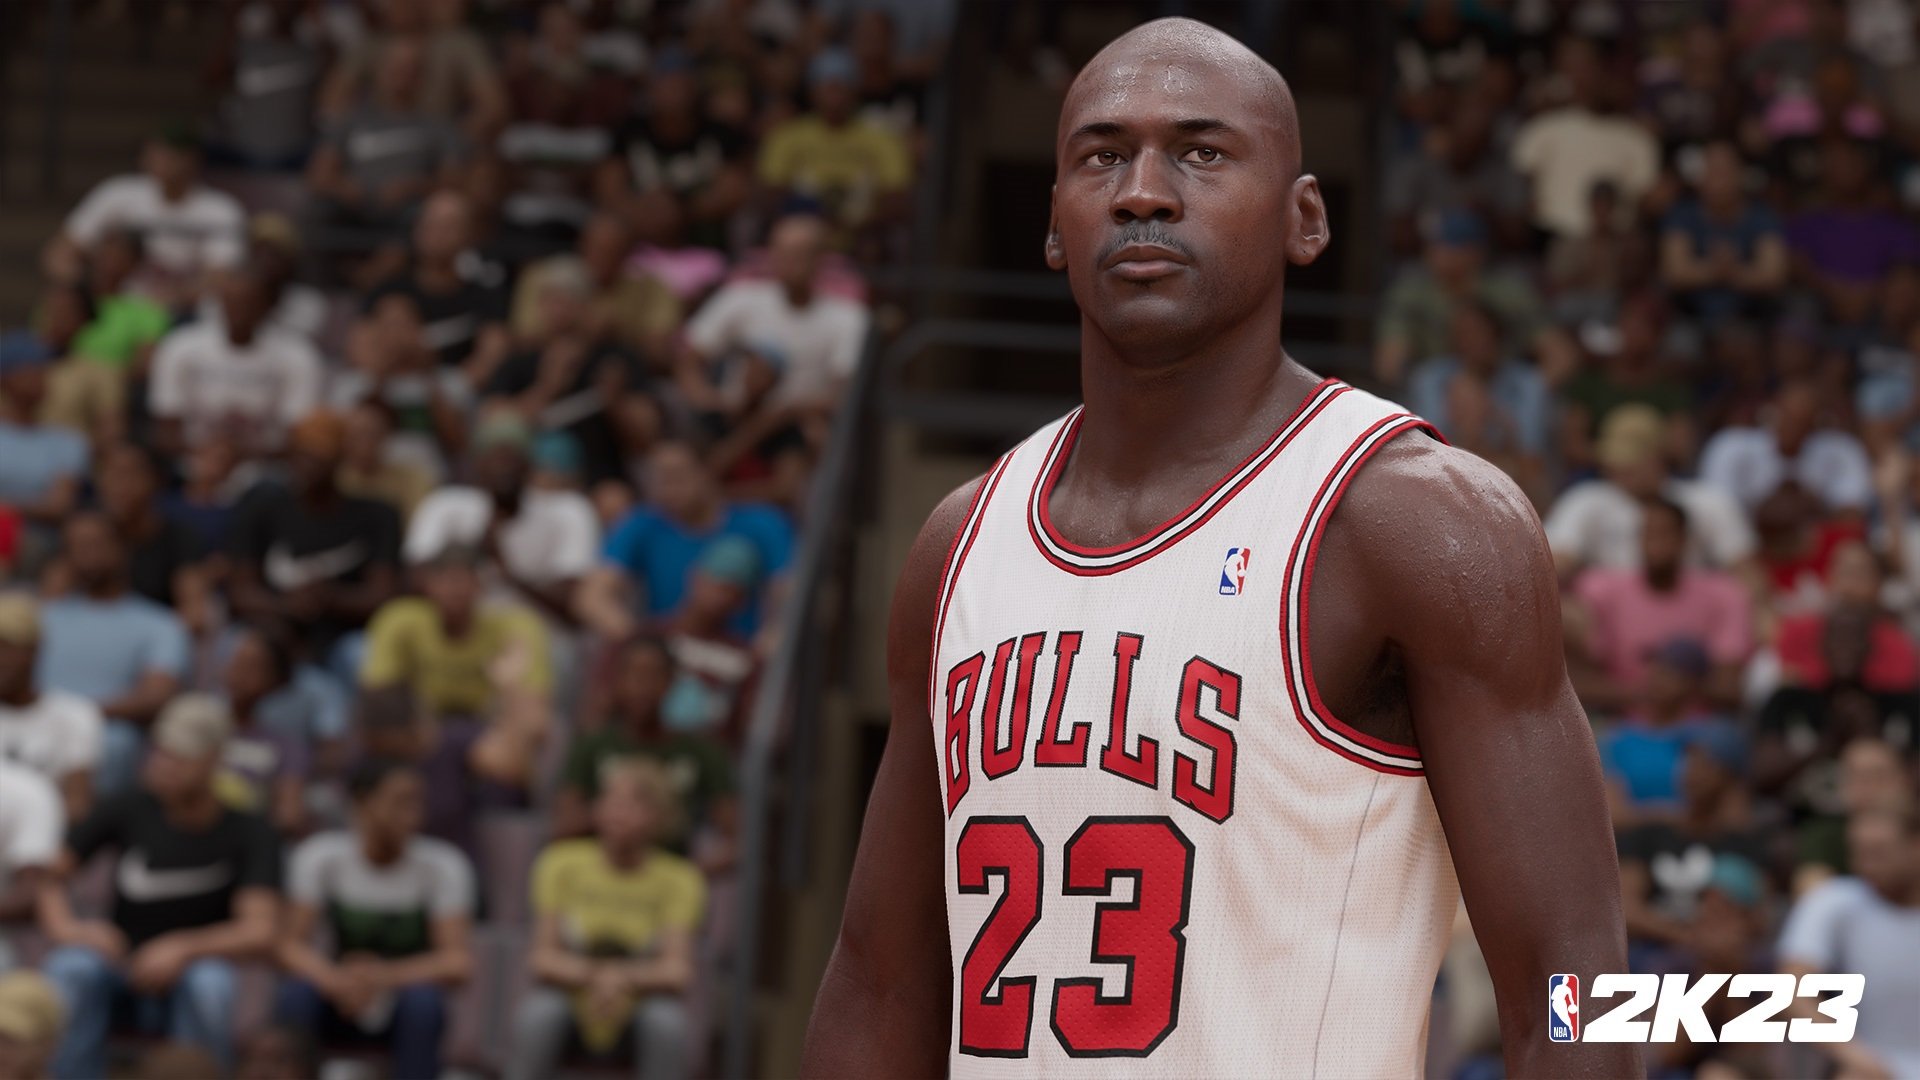 NBA 2K16 Special Edition brings back Michael Jordan on the cover - Polygon